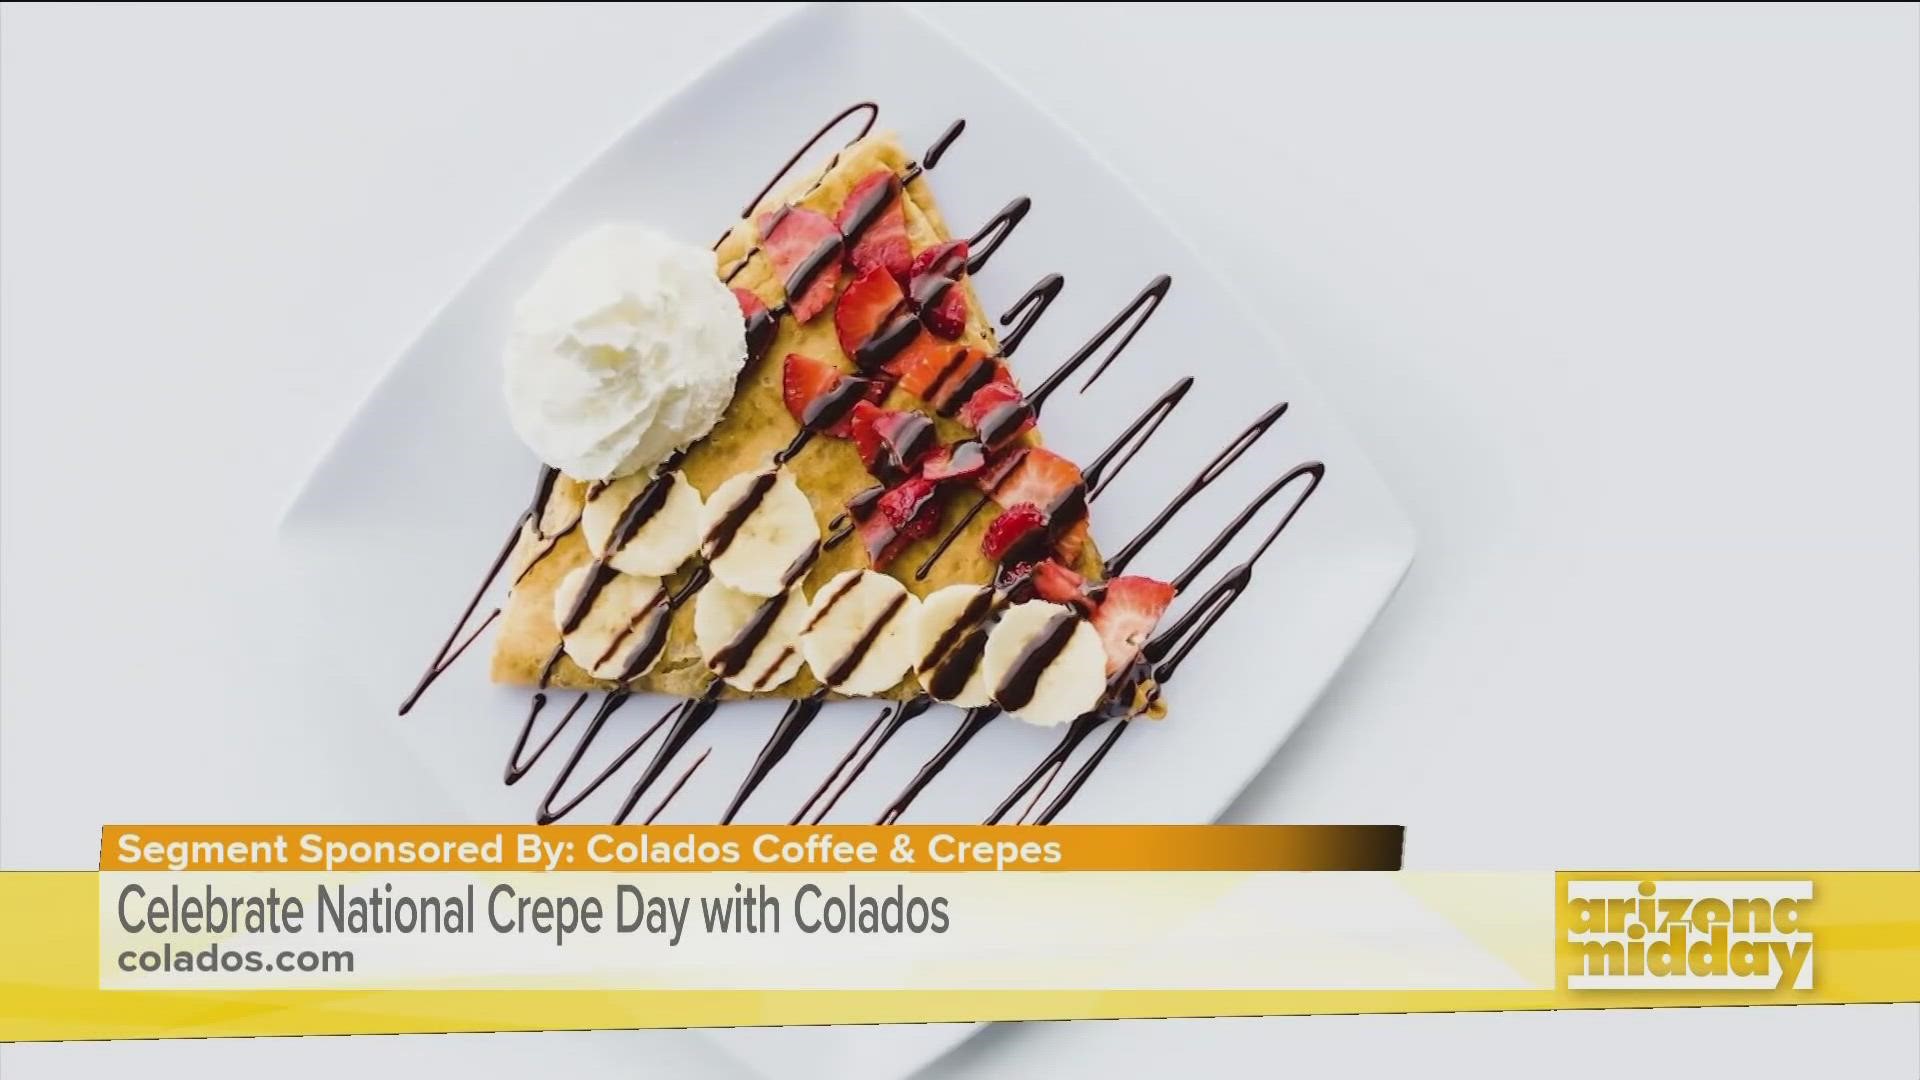 Colados Coffee & Crepes serves crepes made from fresh ingredients with your choice of sweet or savory. Try their menu items today at any of the three locations!